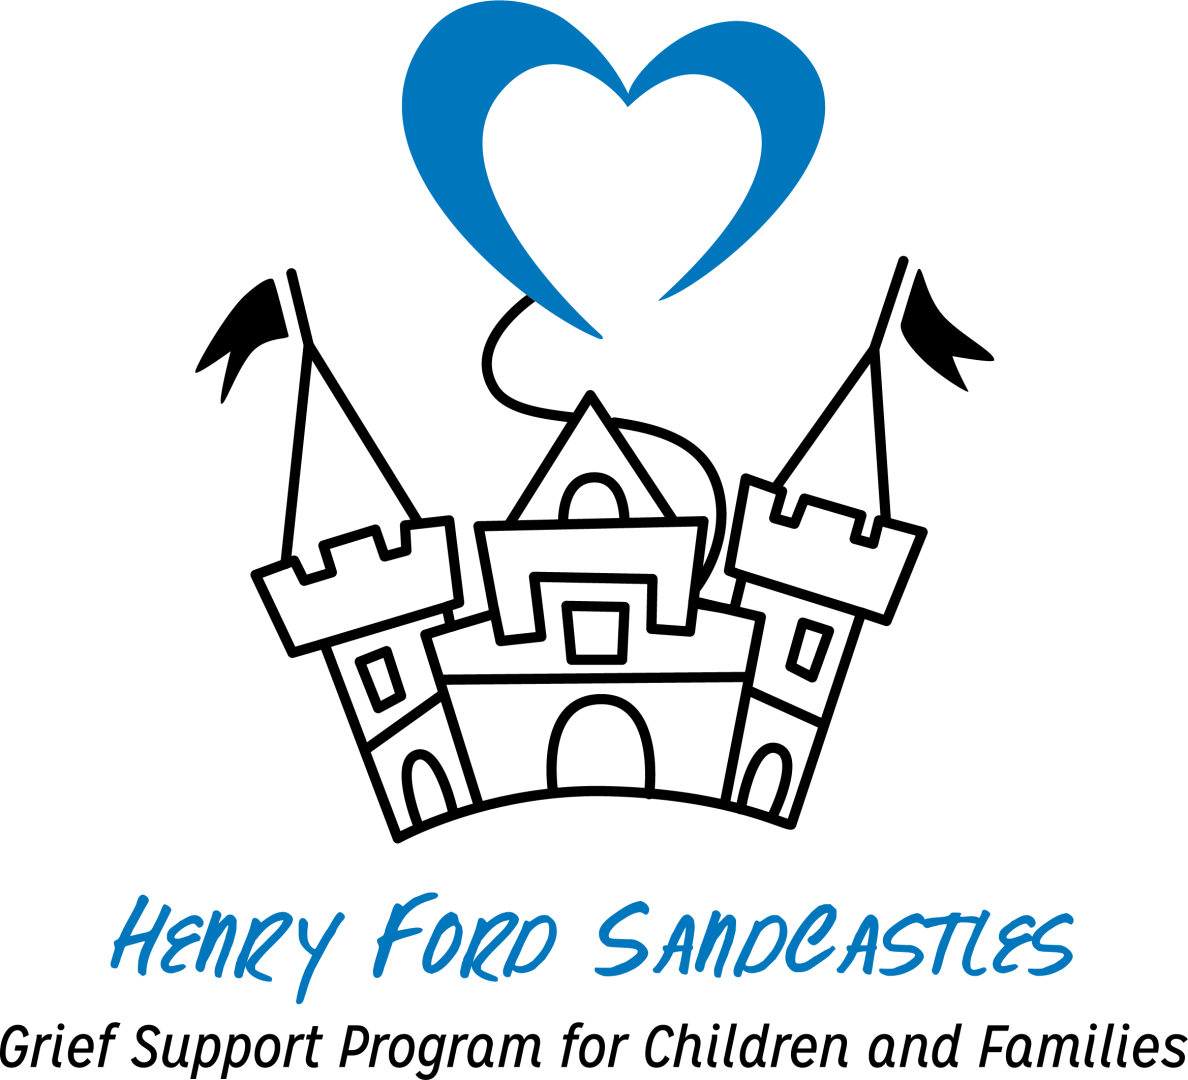 Henry Ford SandCastles logo with blue SandCastle icon